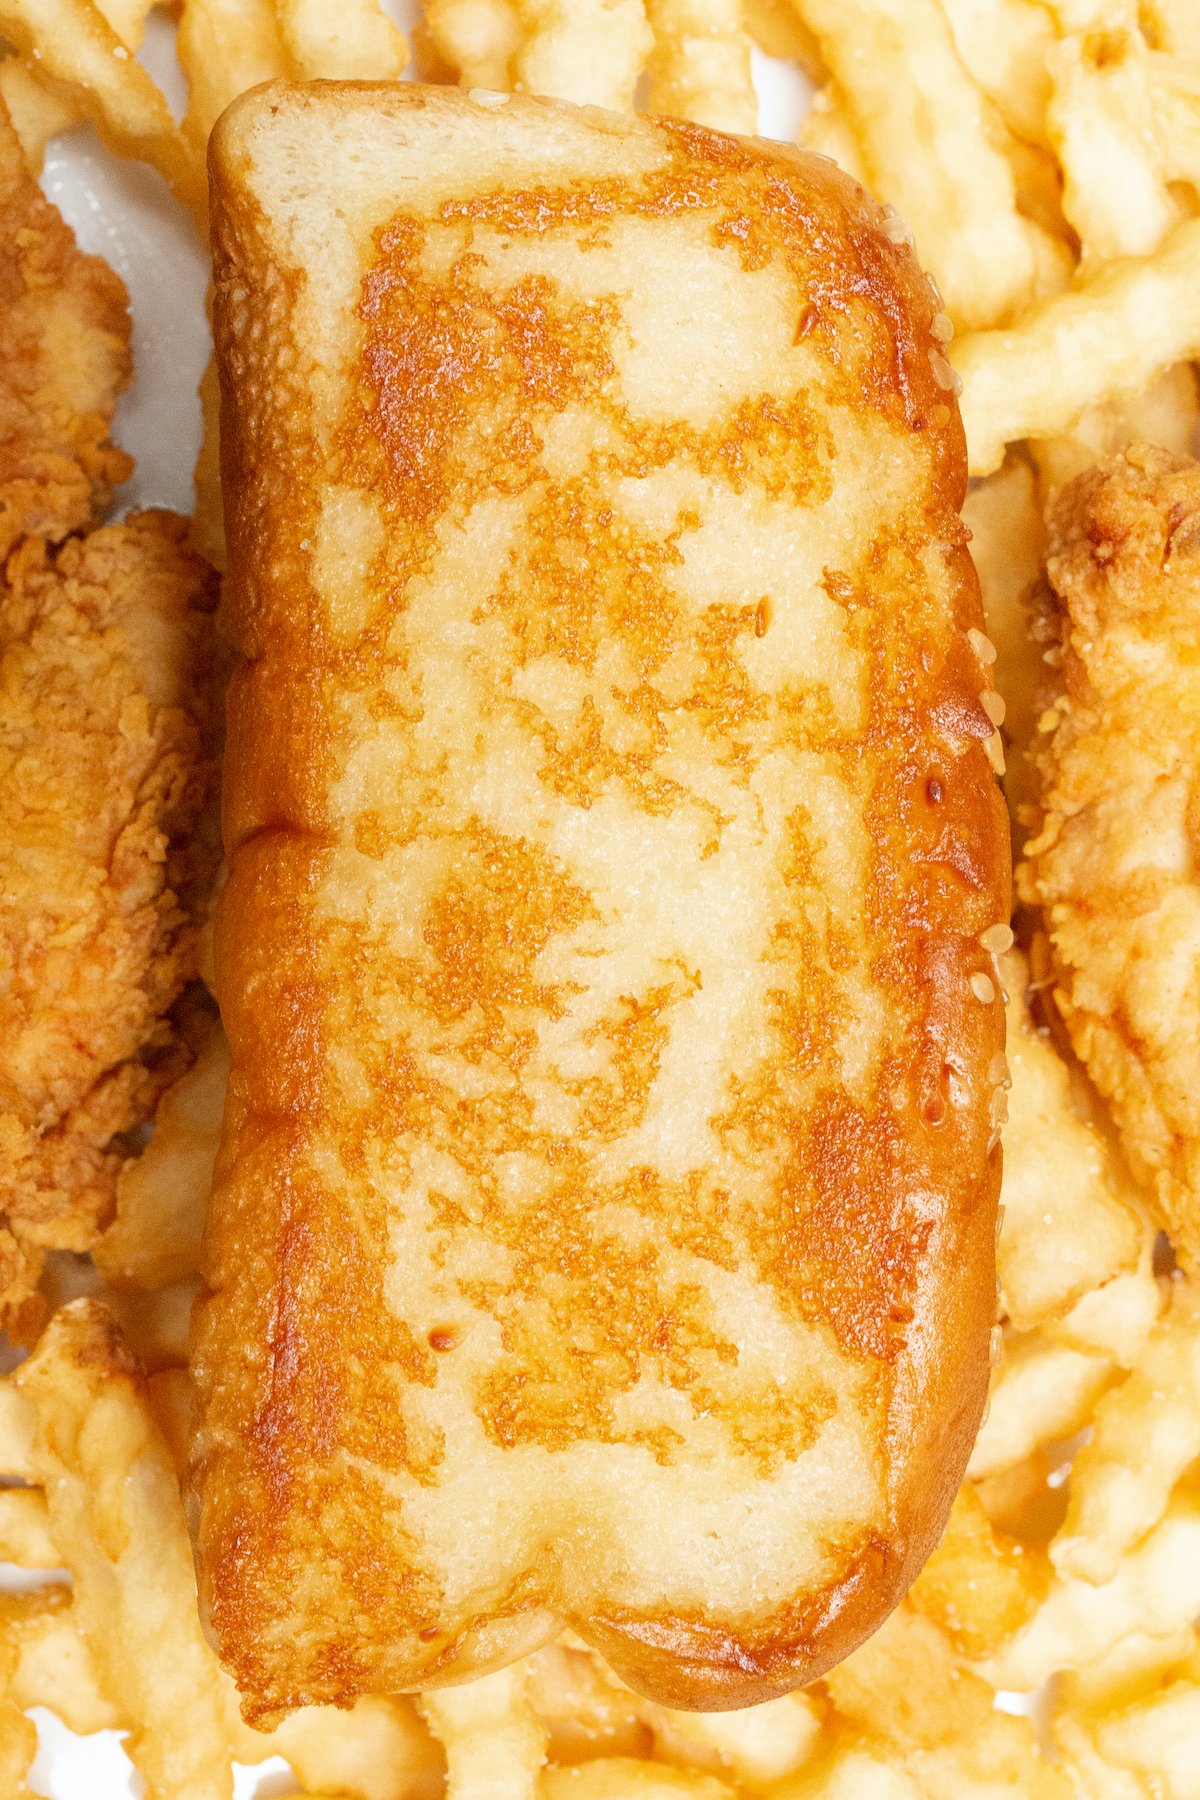 A slice of homemade Raising Canes bread on top of crinkly fries next to chicken tenders.